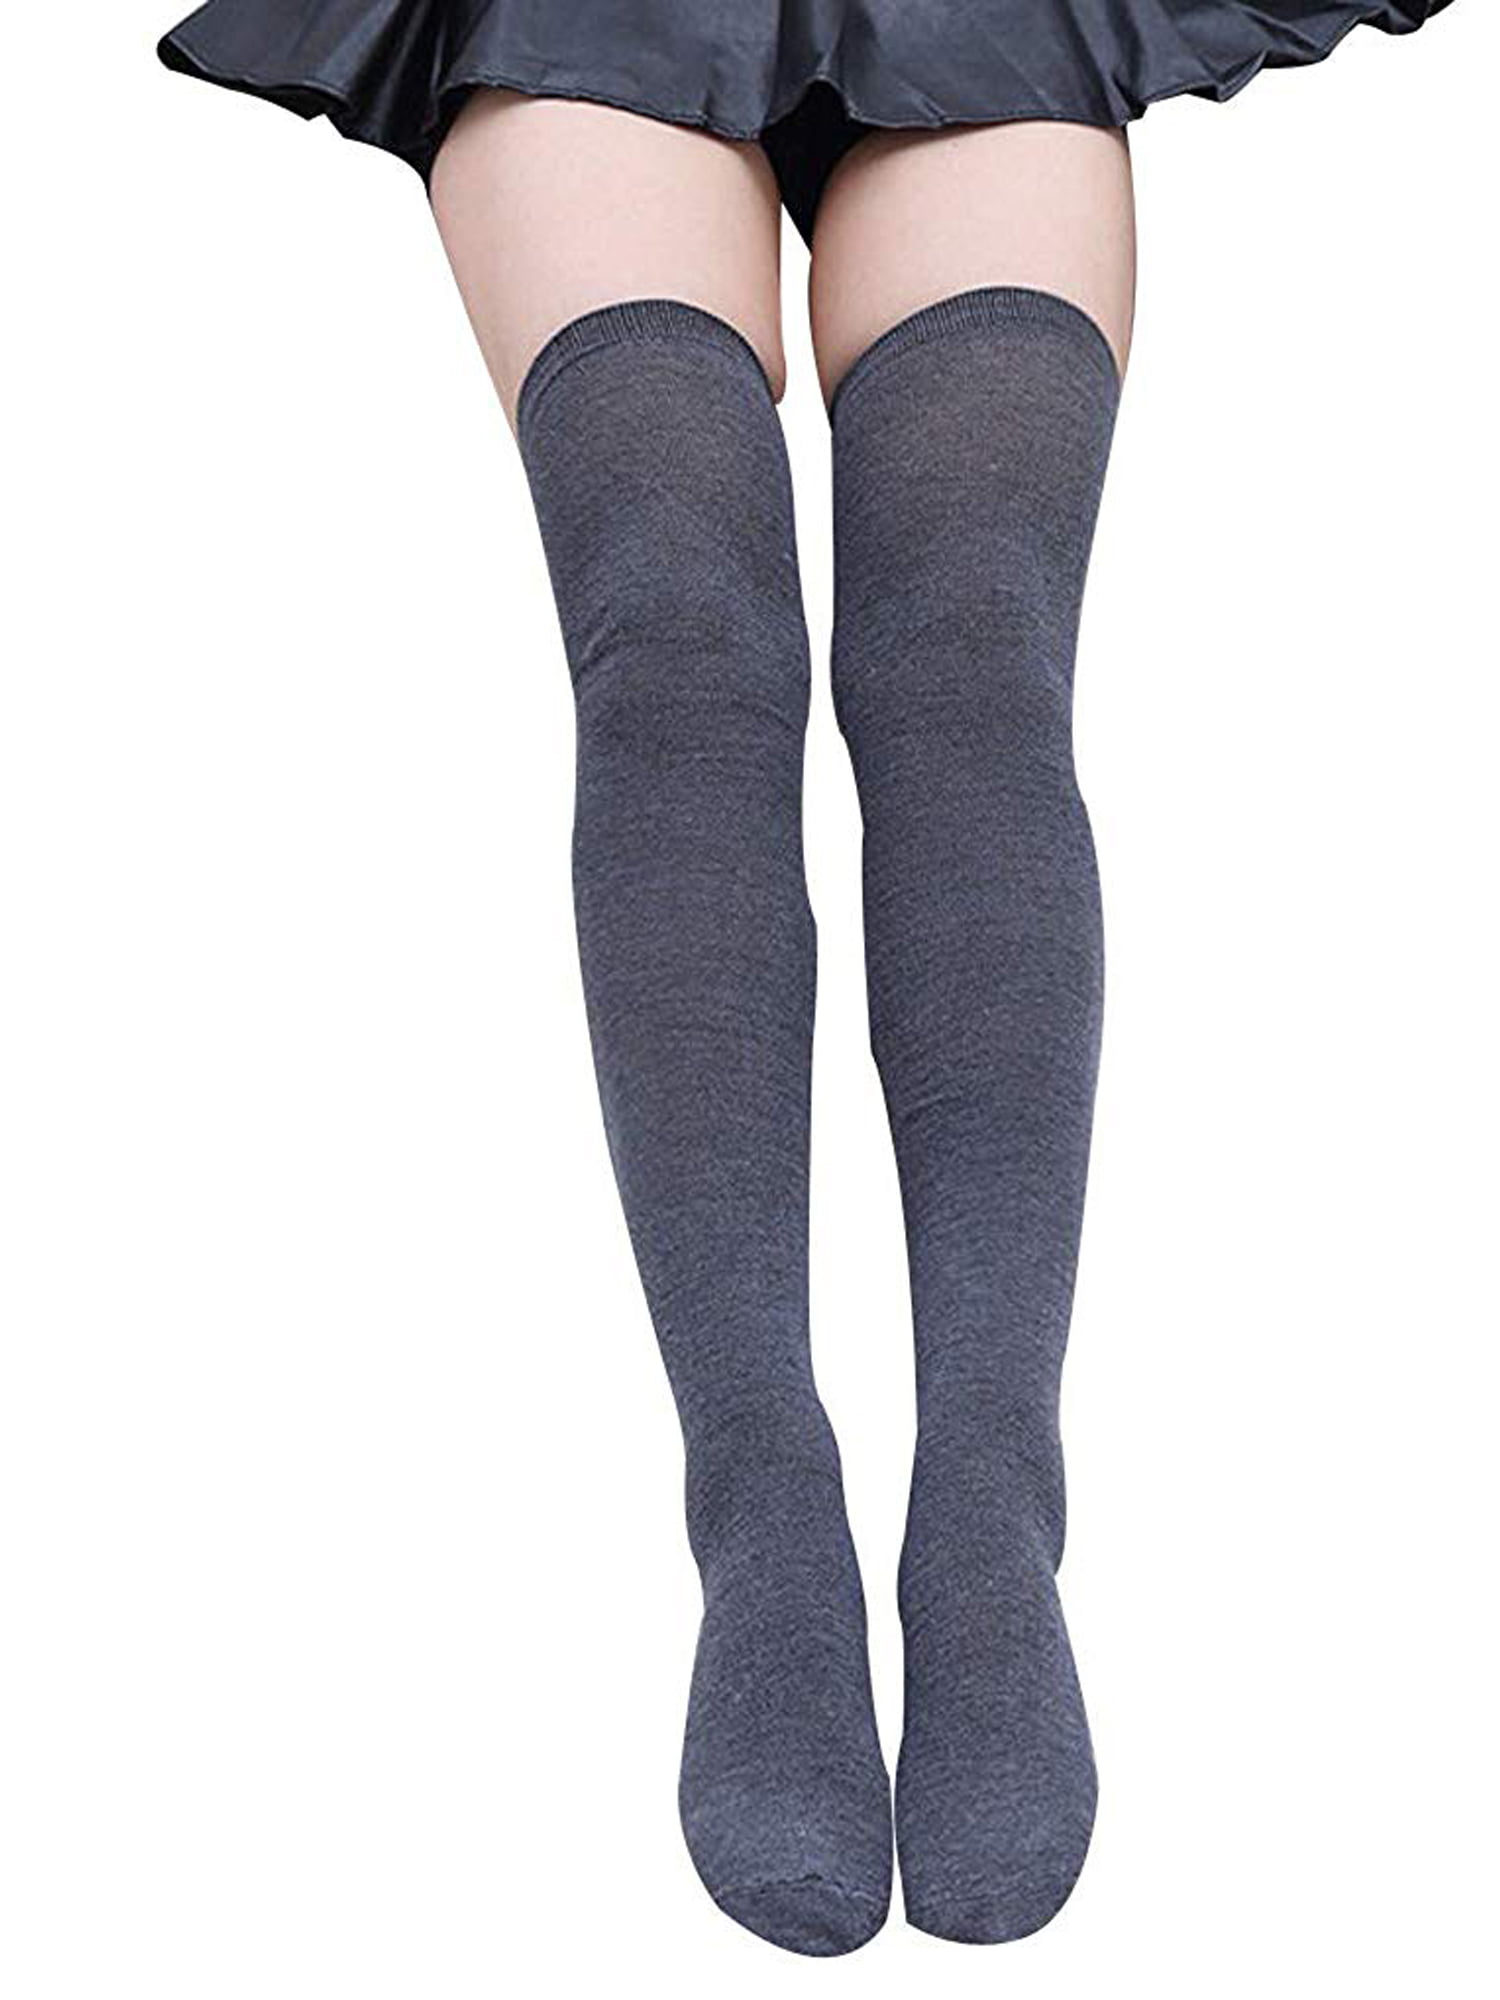 Women Stocking Cable Knit Extra Long Boot Socks Over Knee Thigh High School Girl